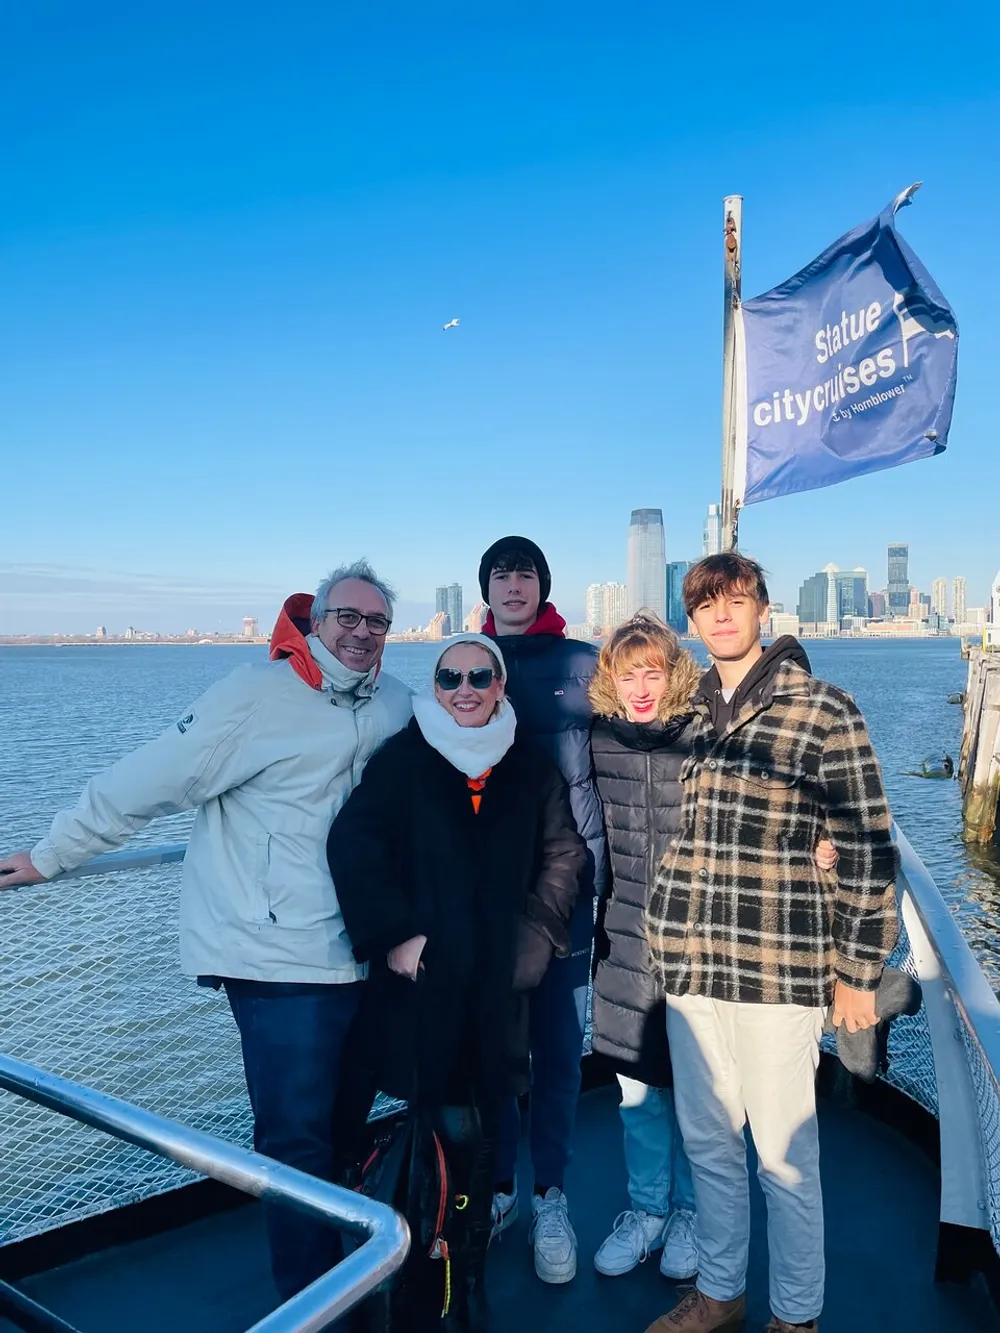 A happy group of people poses for a photo on a boat with the Statue City Cruises flag visible in the background indicating they may be on a tour with a clear blue sky and a coastal city skyline behind them